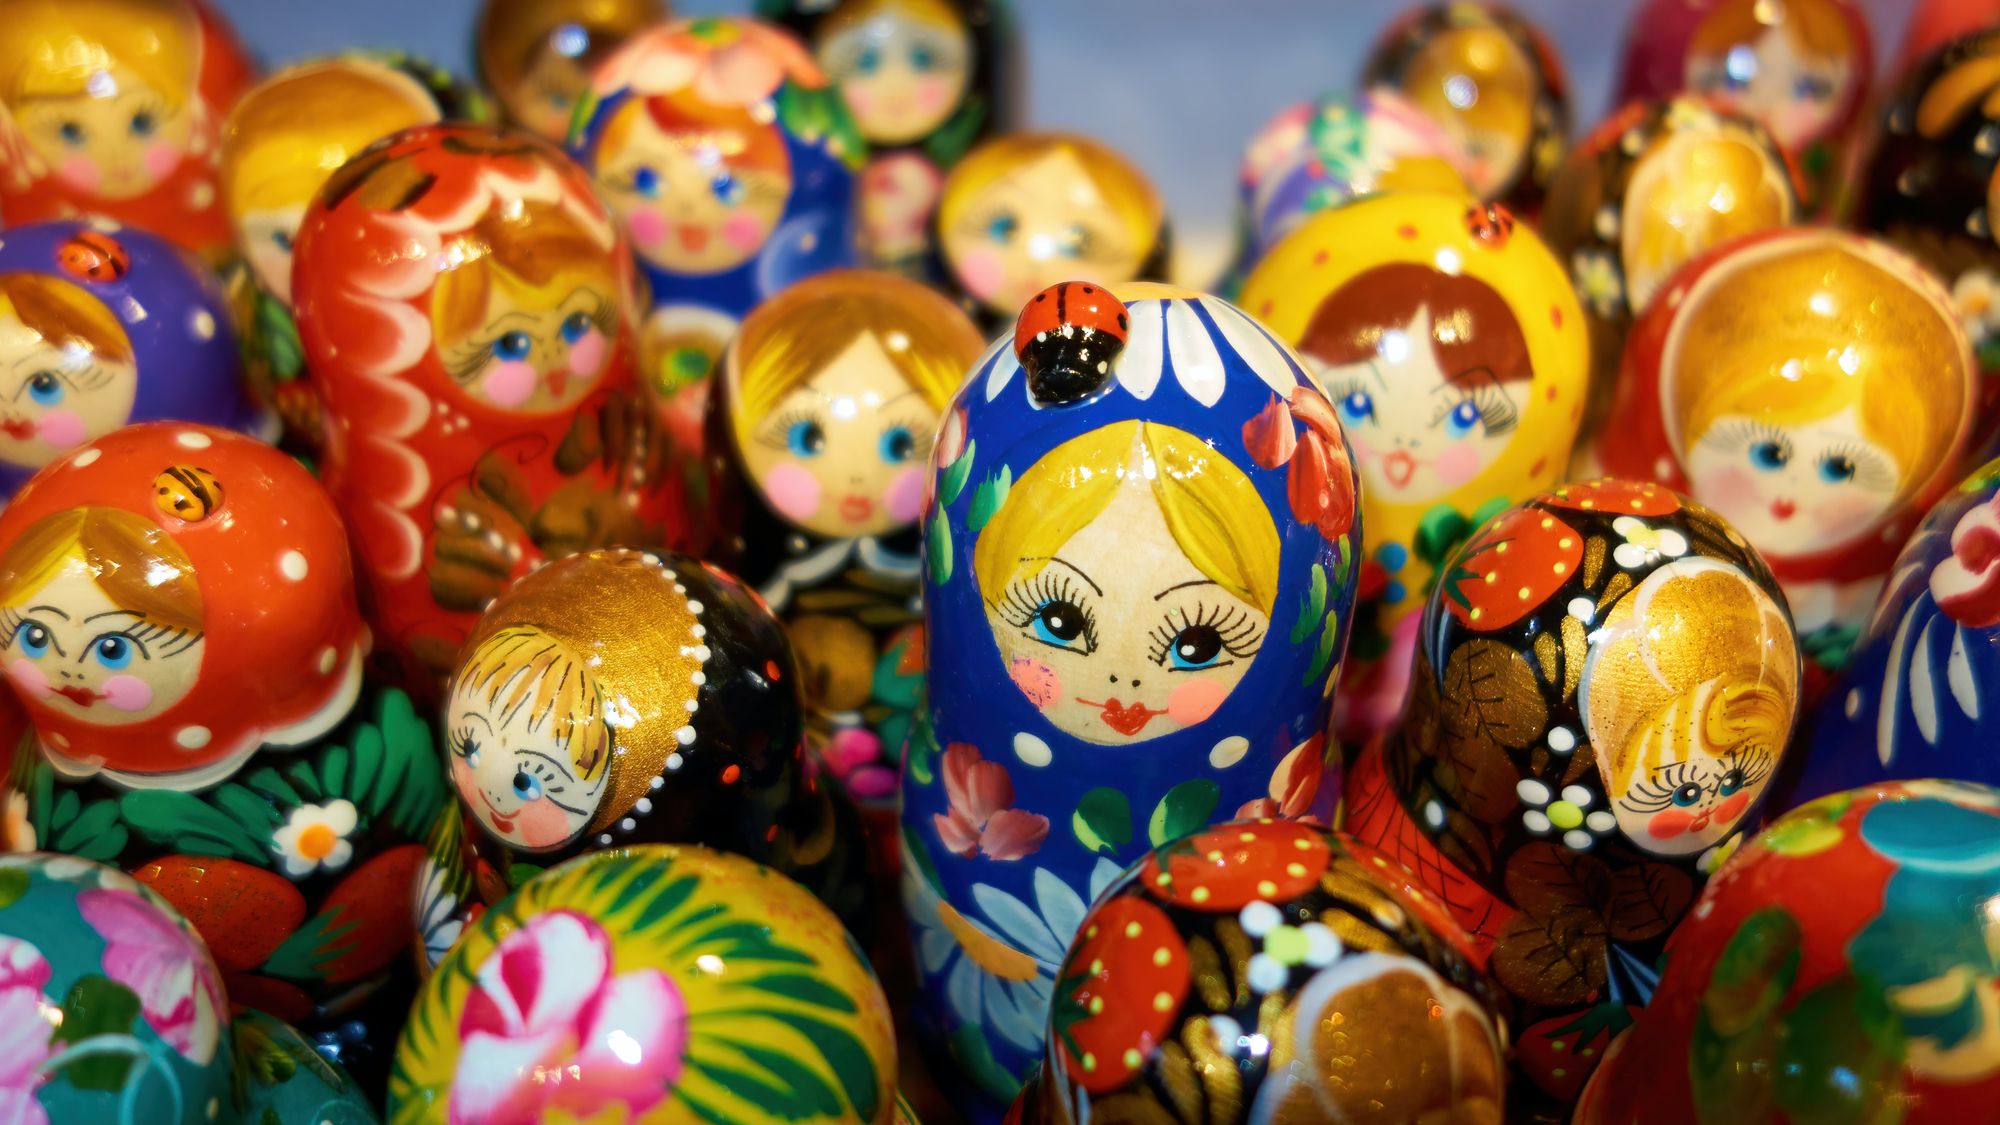 russian stacking dolls as an analogy for verticals within verticals.